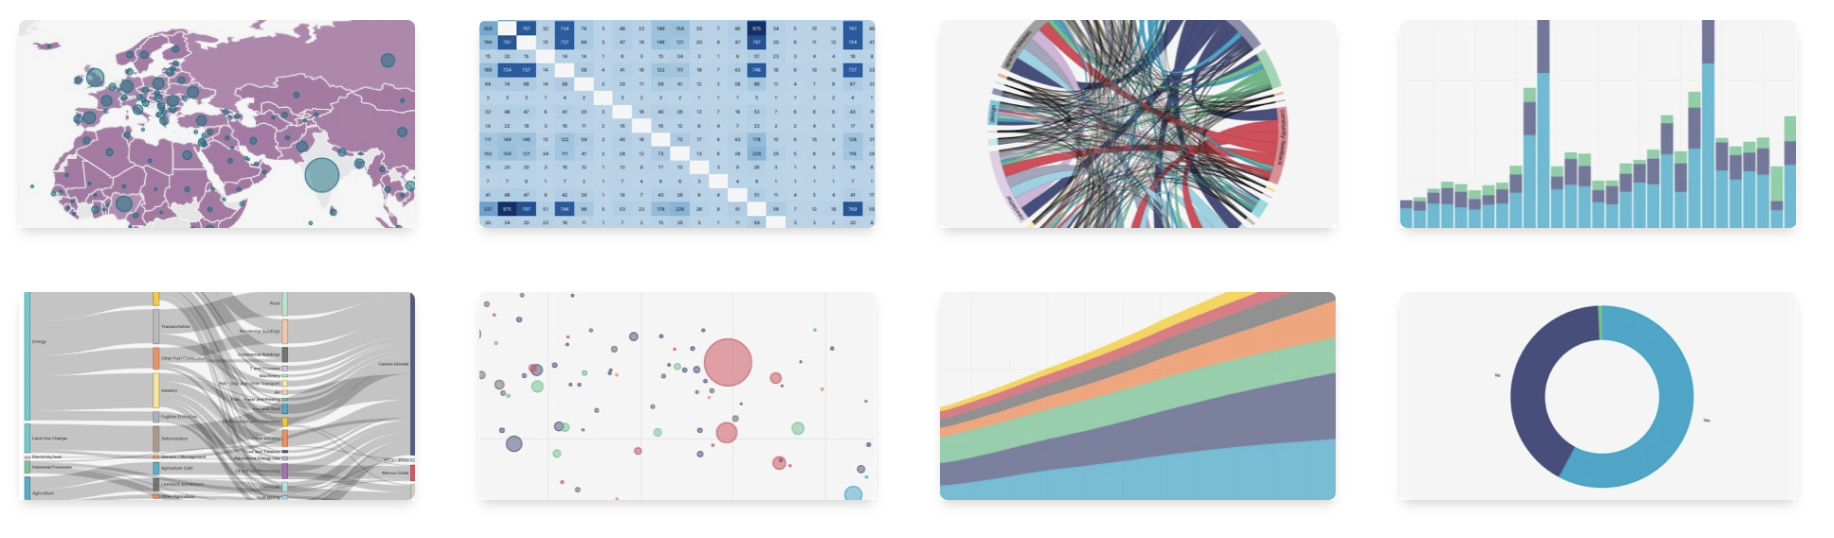 Draw from over 40 types of visualizations